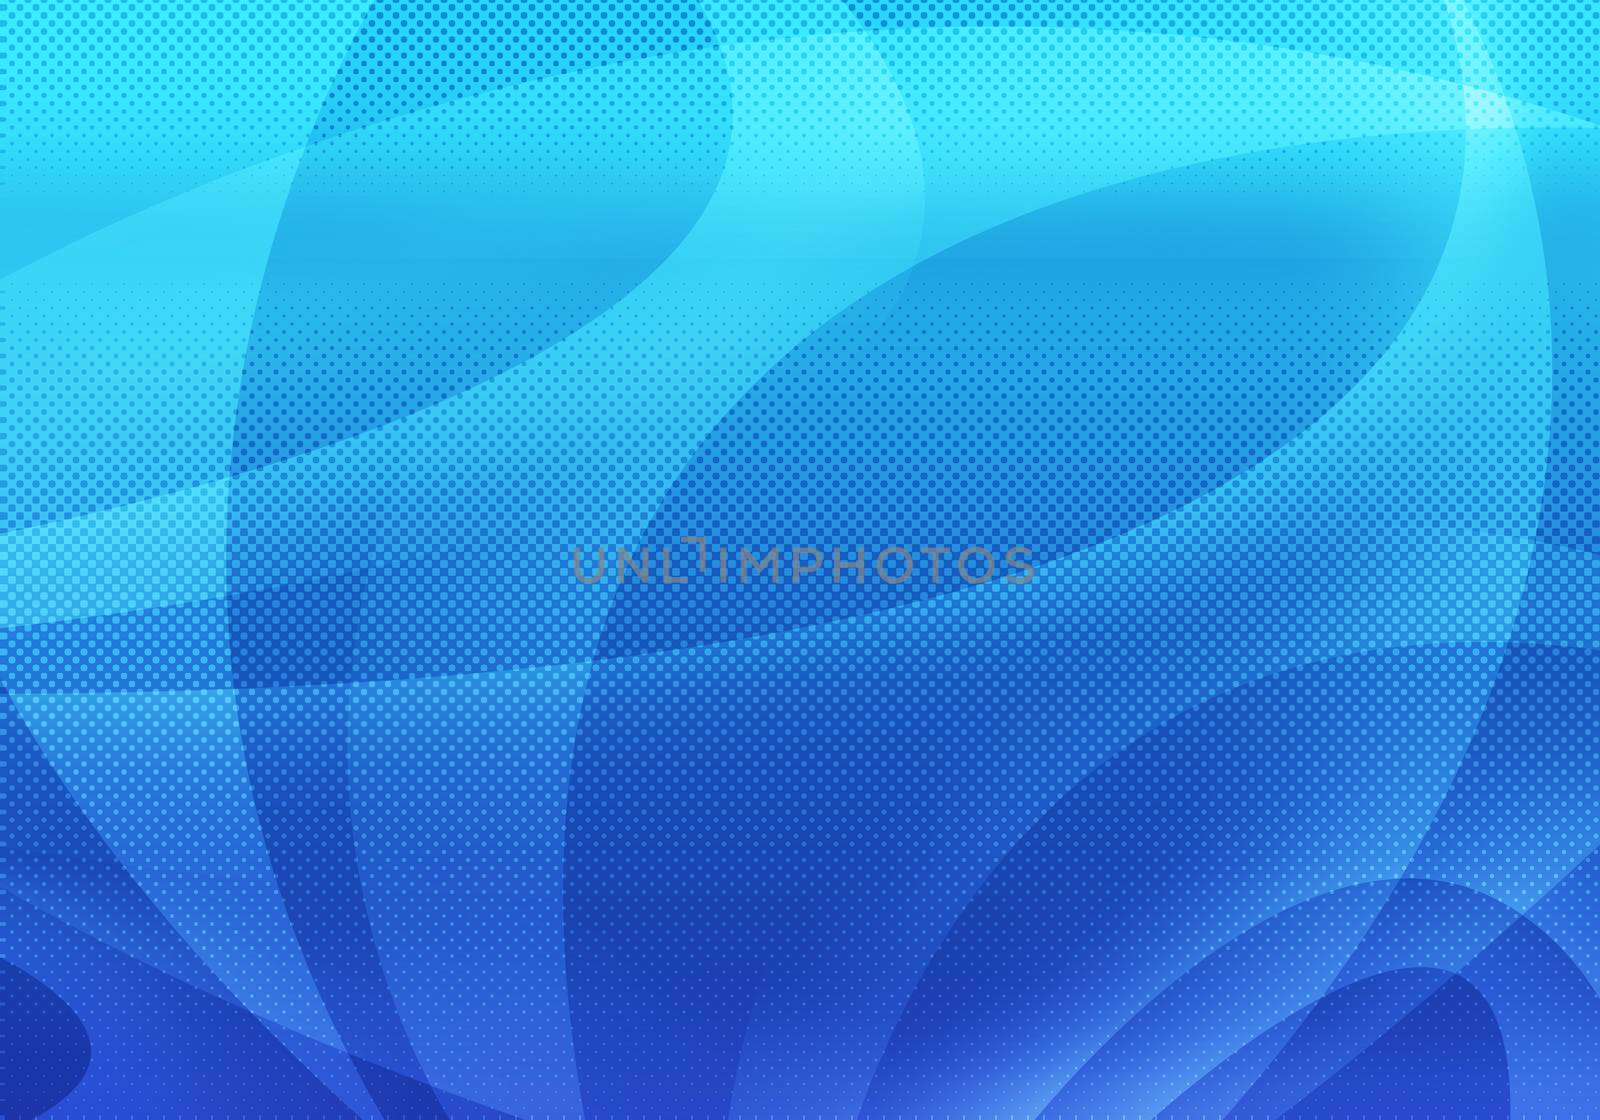 Abstract blue background with smooth lines. Contemporary style